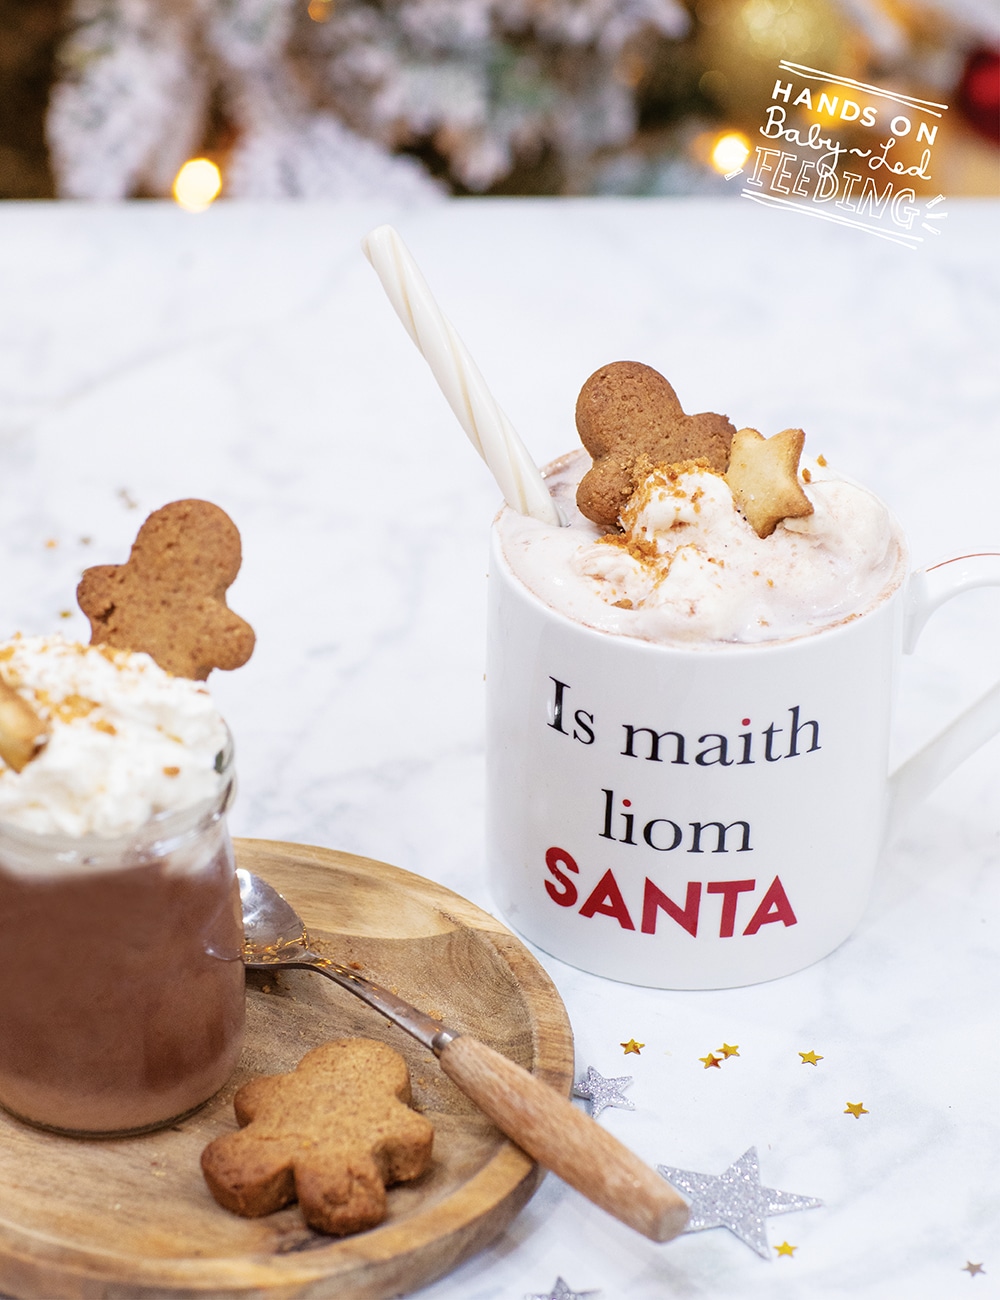 Refined sugar free, homemade gingerbread hot chocolate with fresh coconut whipped cream! Vegan recipe- choose your own milk. Lactose free. Baby and toddler friendly Christmas recipe. #christmasrecipe #hotchocolate #vegan #lactosefree